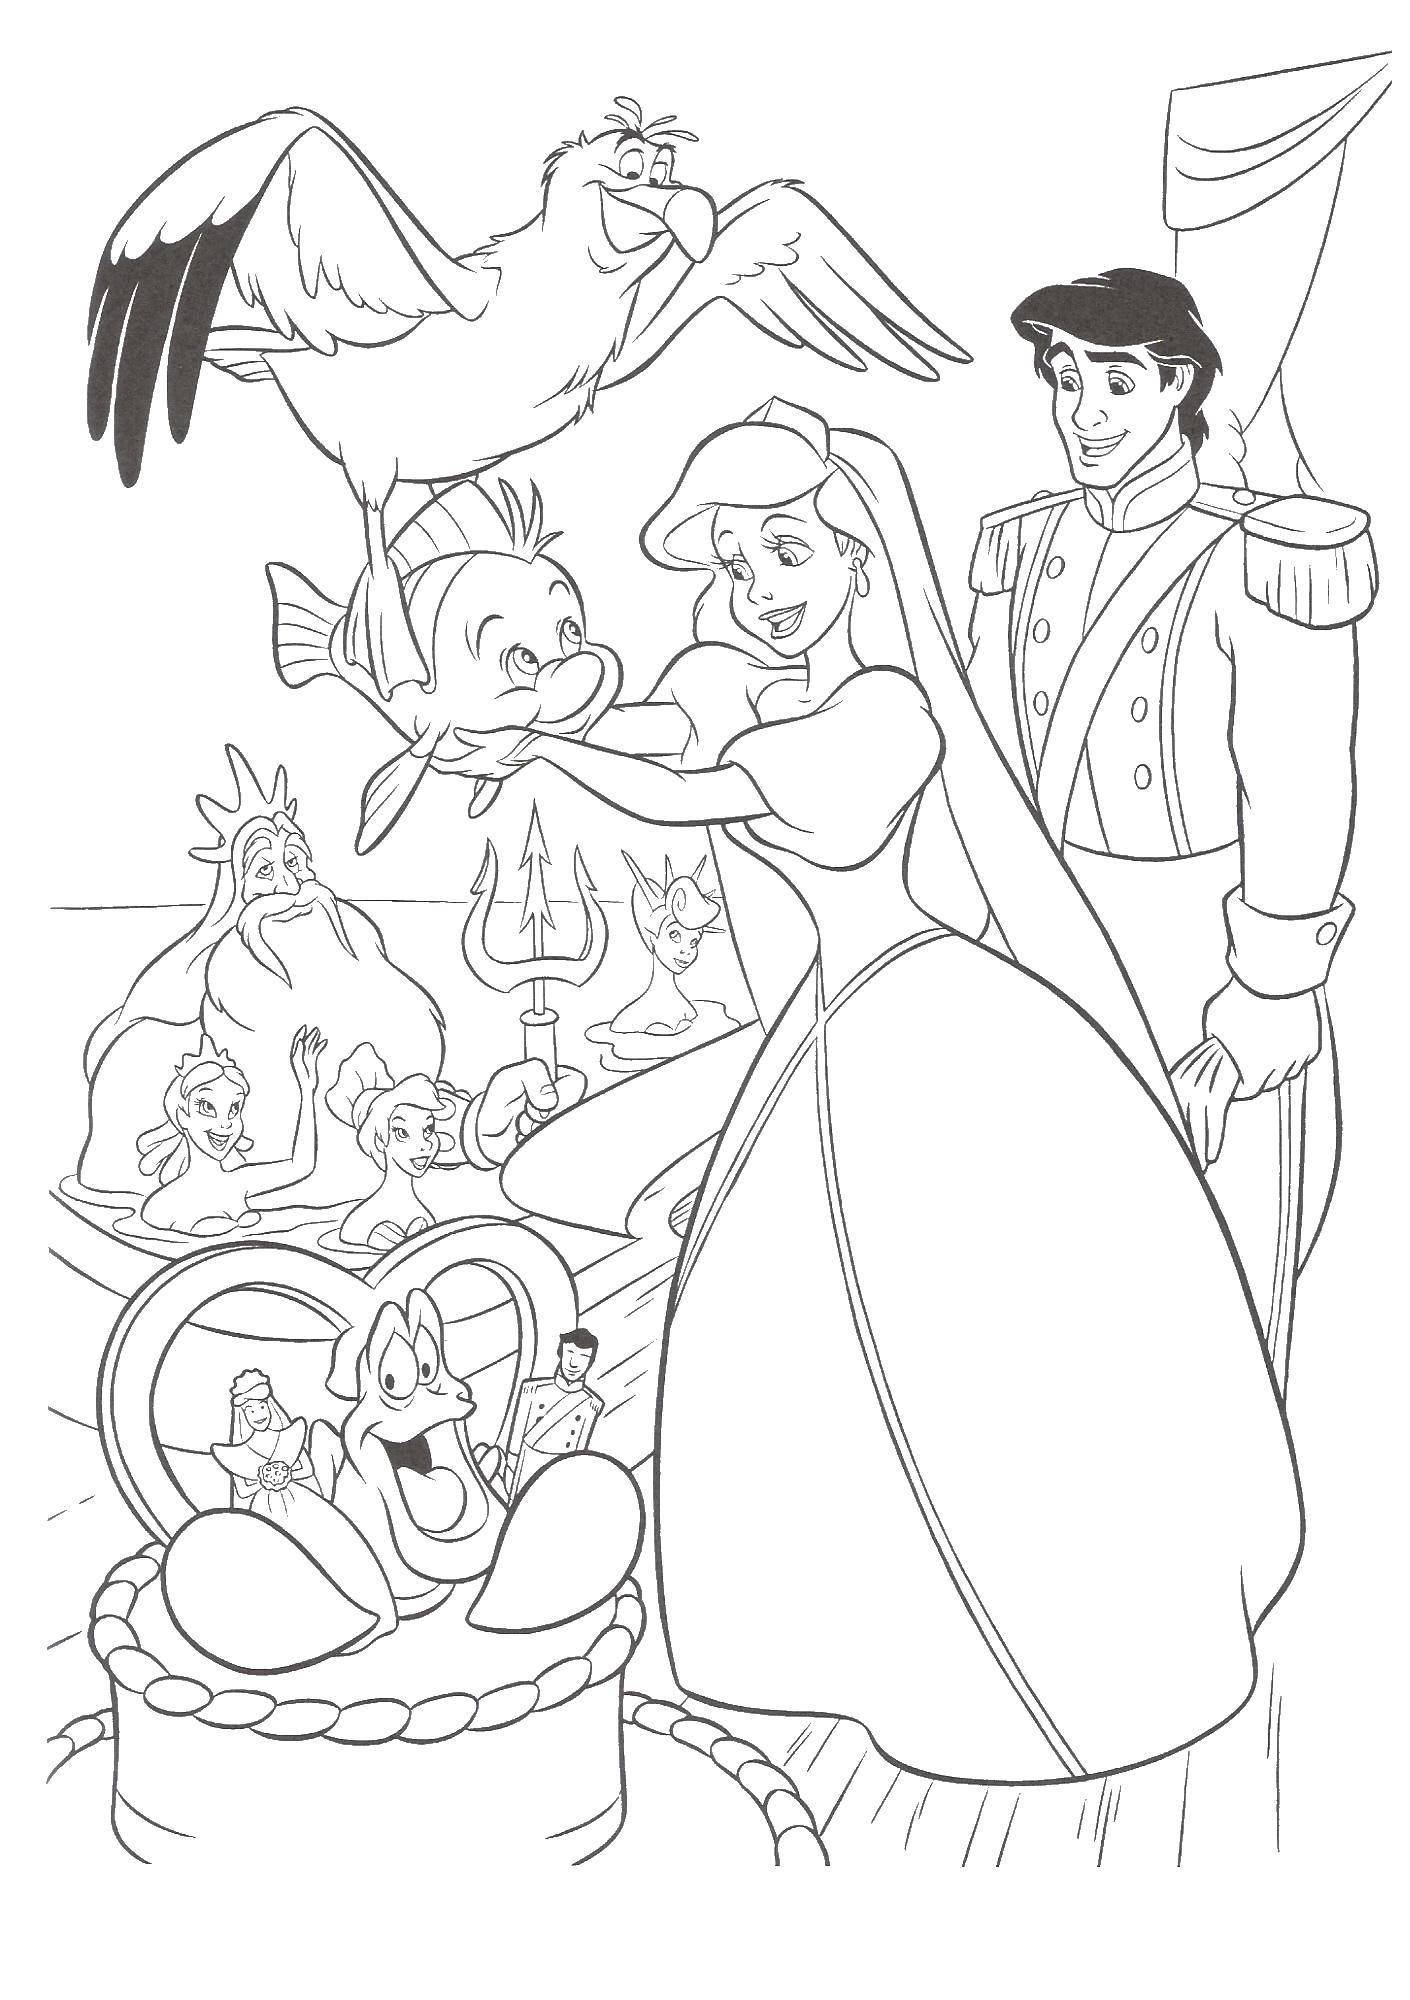 Coloring Ariel with Prince and friends. Category The little mermaid. Tags:  mermaid, girl, sea, Ariel, Prince.